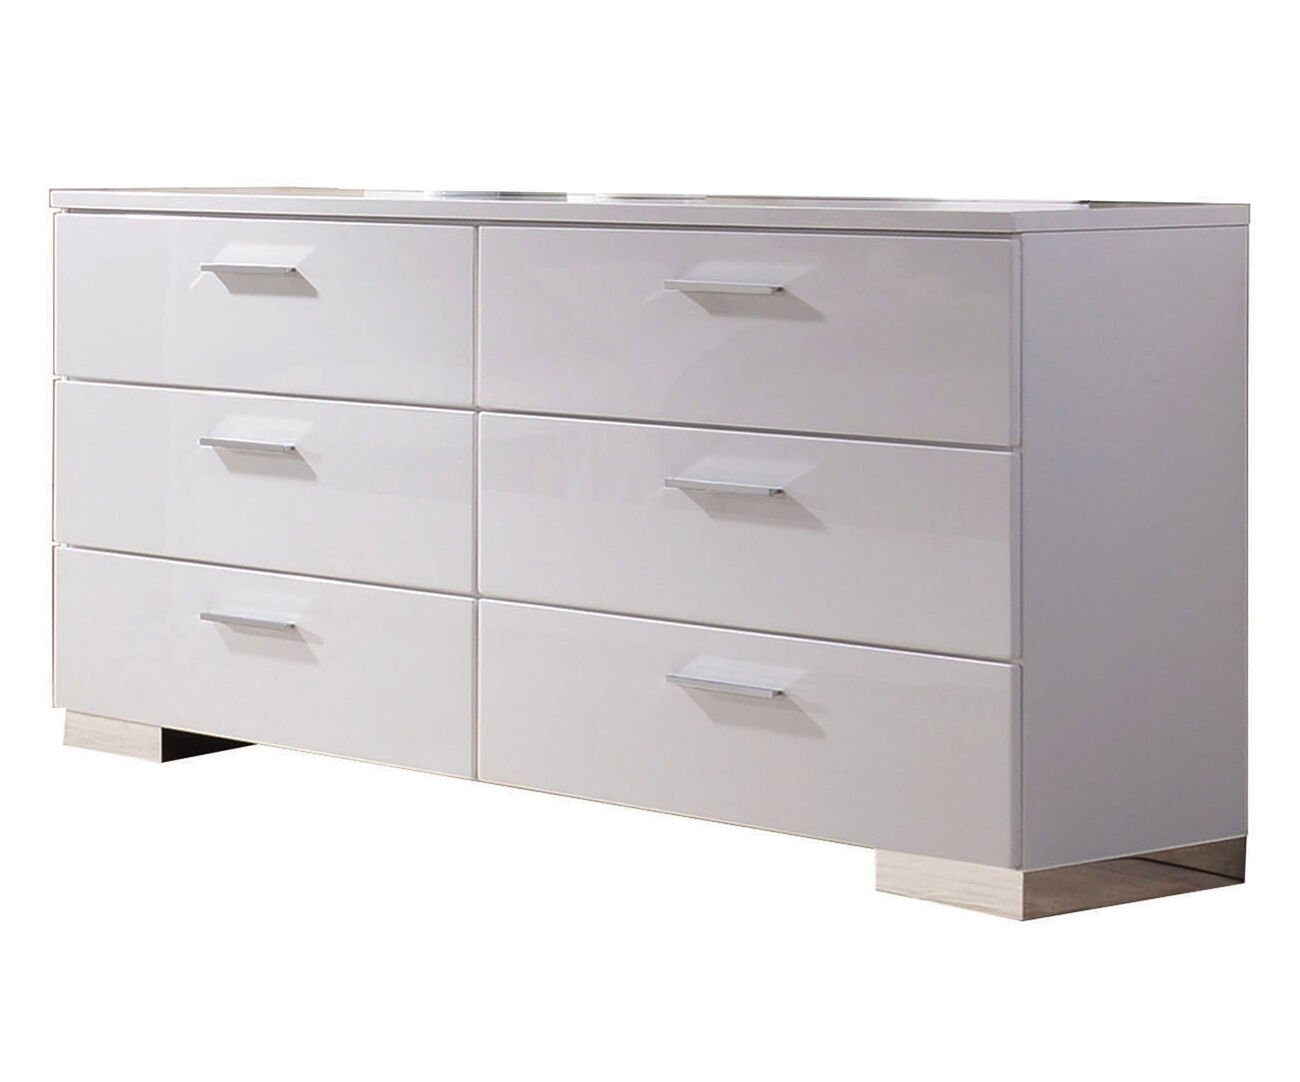 High Gloss Finish Wood and Metal Dresser with 6 Spacious Drawers,White